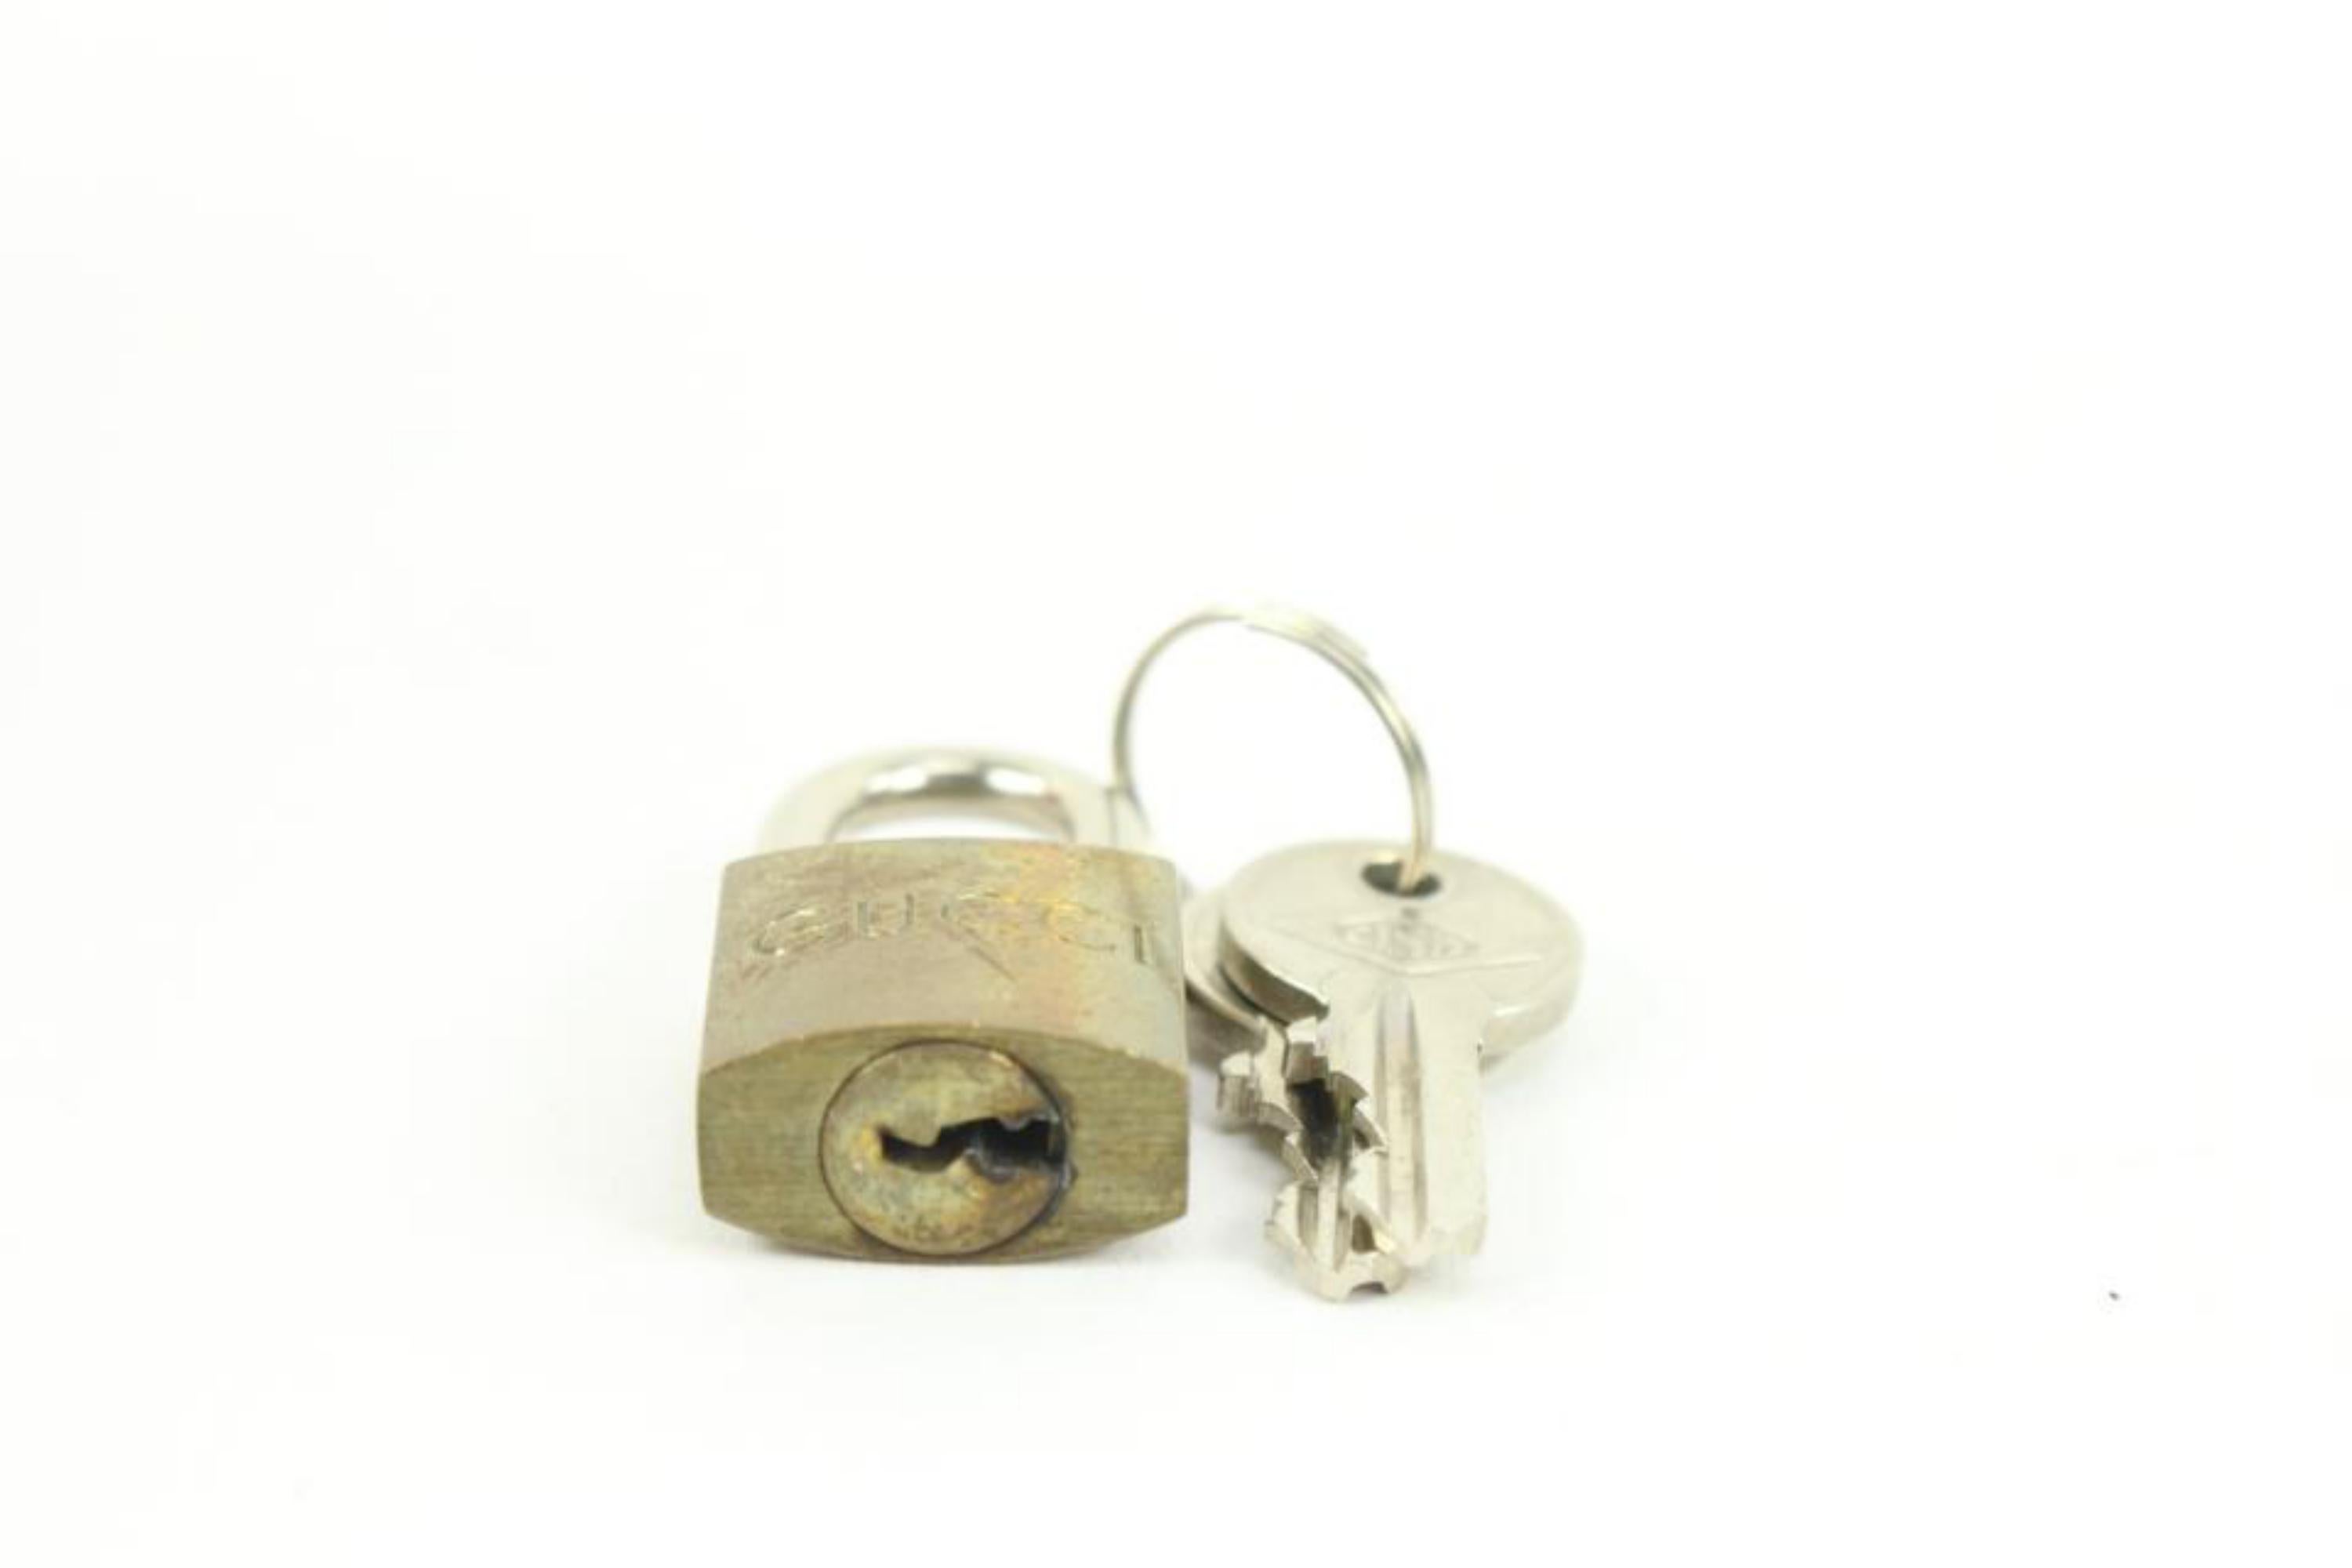 Gucci Brass GG Lock and Key Padlock Bag Charm Cadena 11g222s In Fair Condition For Sale In Dix hills, NY